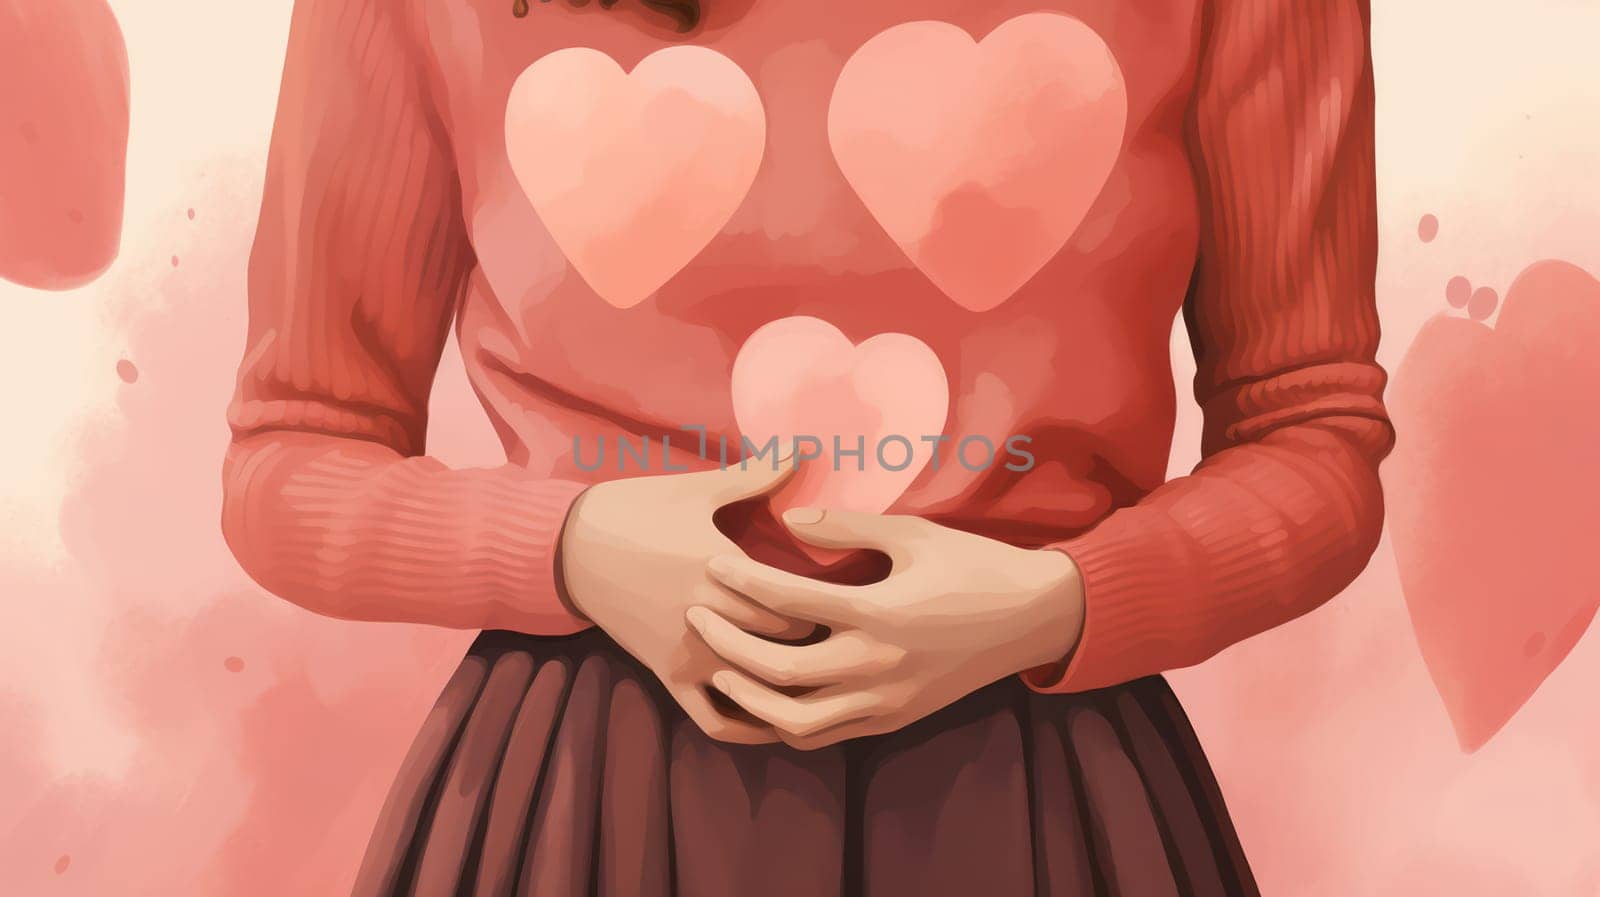 Anticipation of Love: A Happy Pregnant Woman's Hands Holding her Baby Bump in a Symbolic Heart Shape, Embracing the Concept of Motherhood by Vichizh